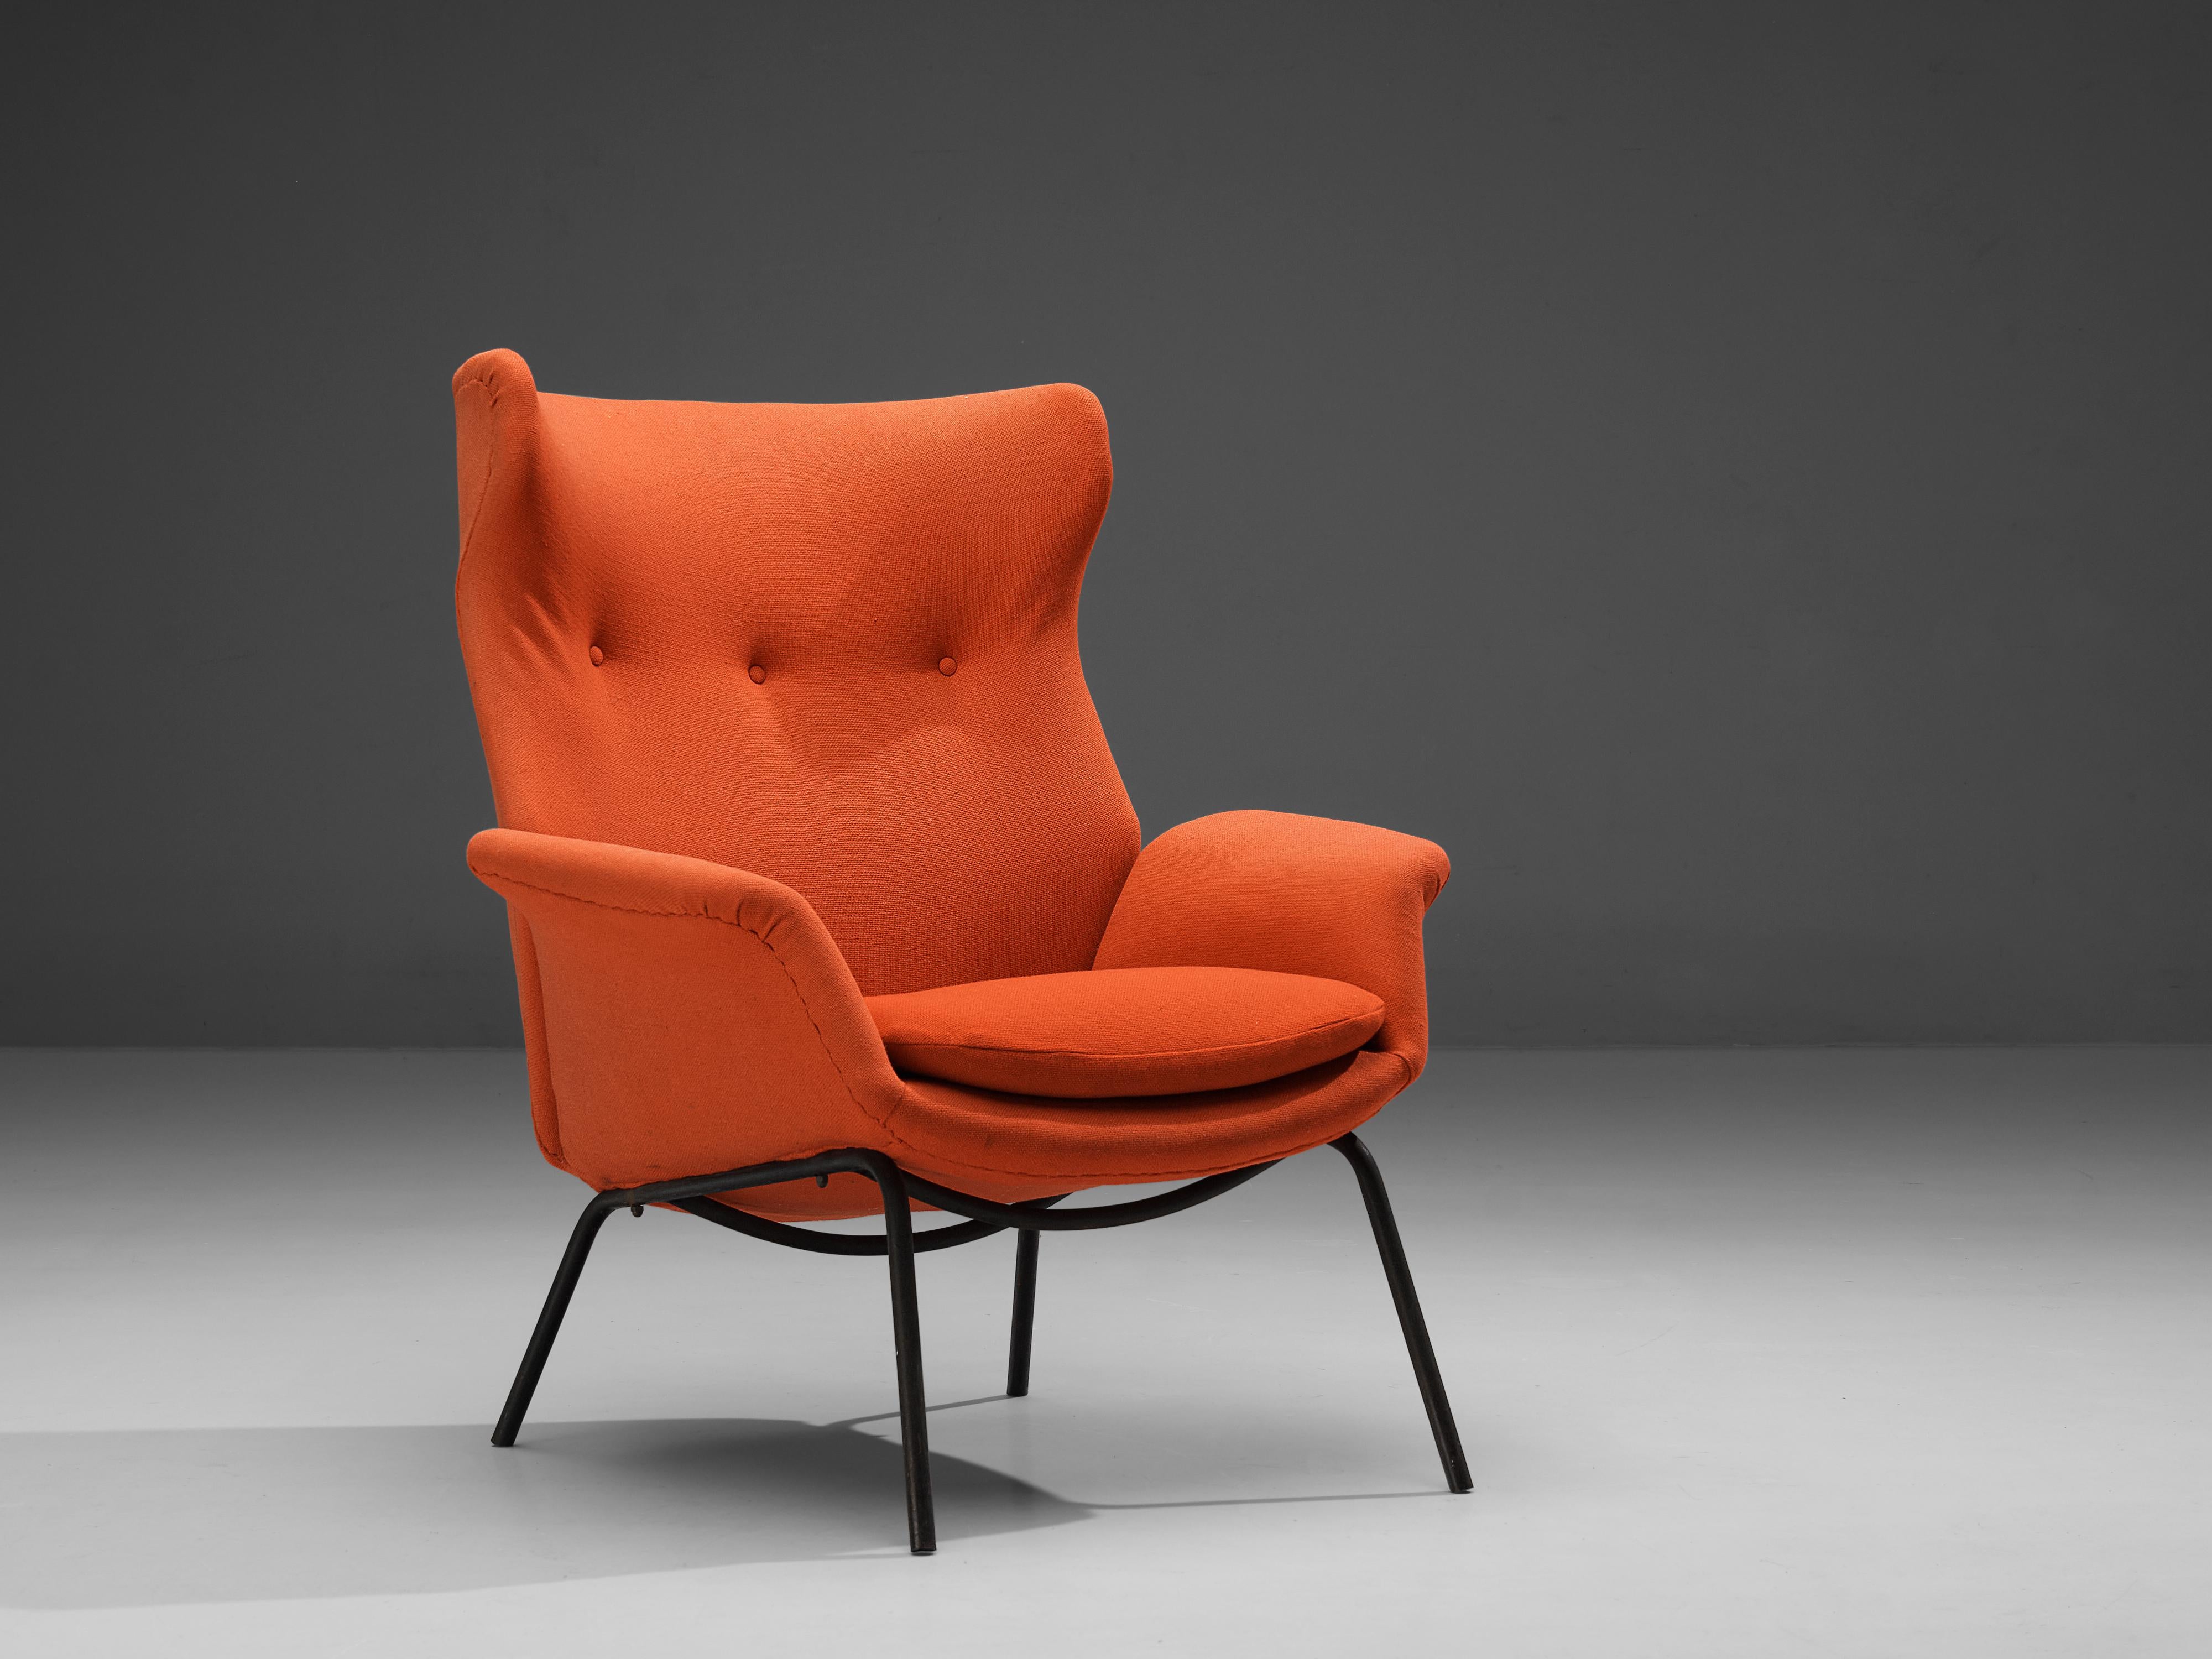 Wingback chair, metal, fabric, Italy, 1960s

Eccentric wingback chair in its original orange upholstery. The softness of the shell of this comfortable and quirky chair appears in the beautifully executed subtle lines and angles. The black coated